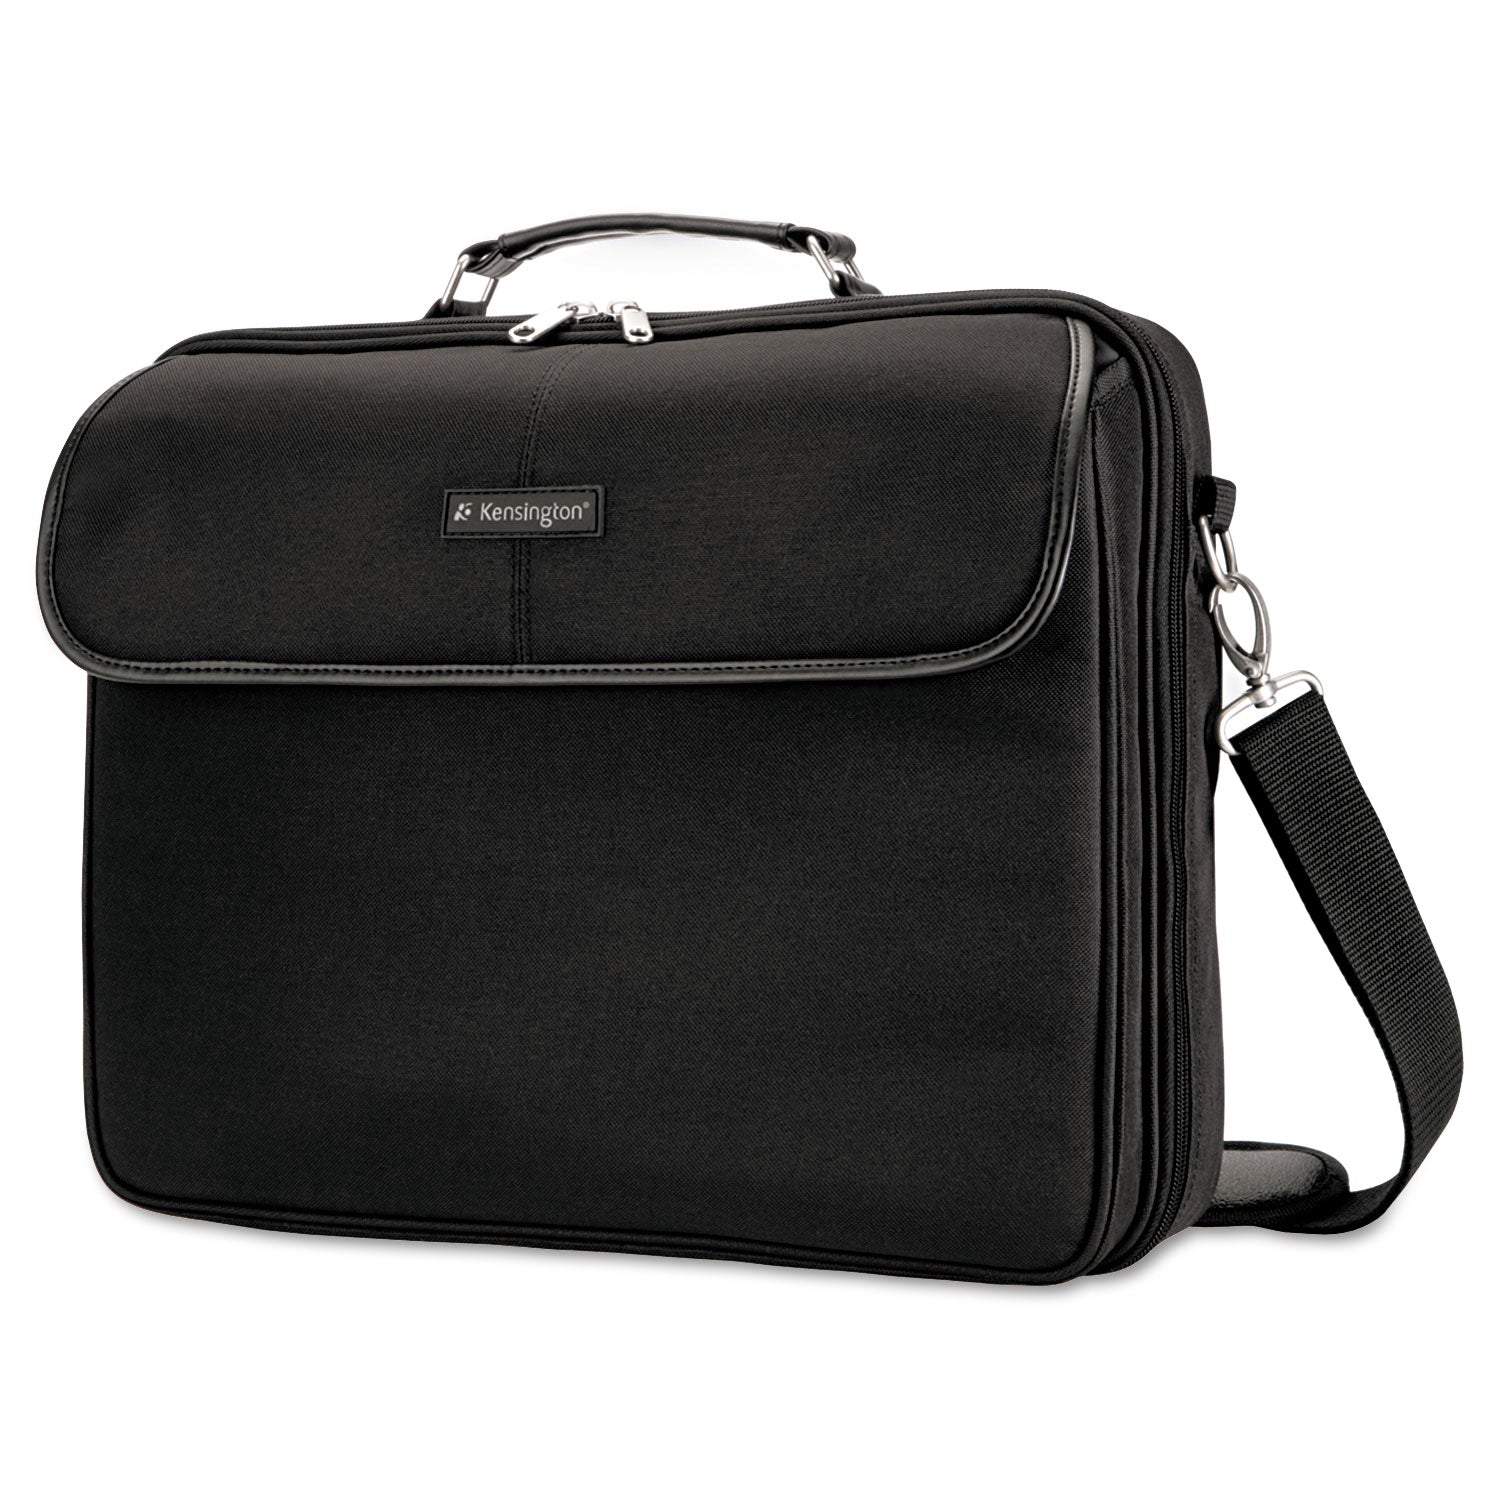 Simply Portable 30 Laptop Case, Fits Devices Up to 15.6", Polyester, 15.75 x 3 x 13.5, Black - 